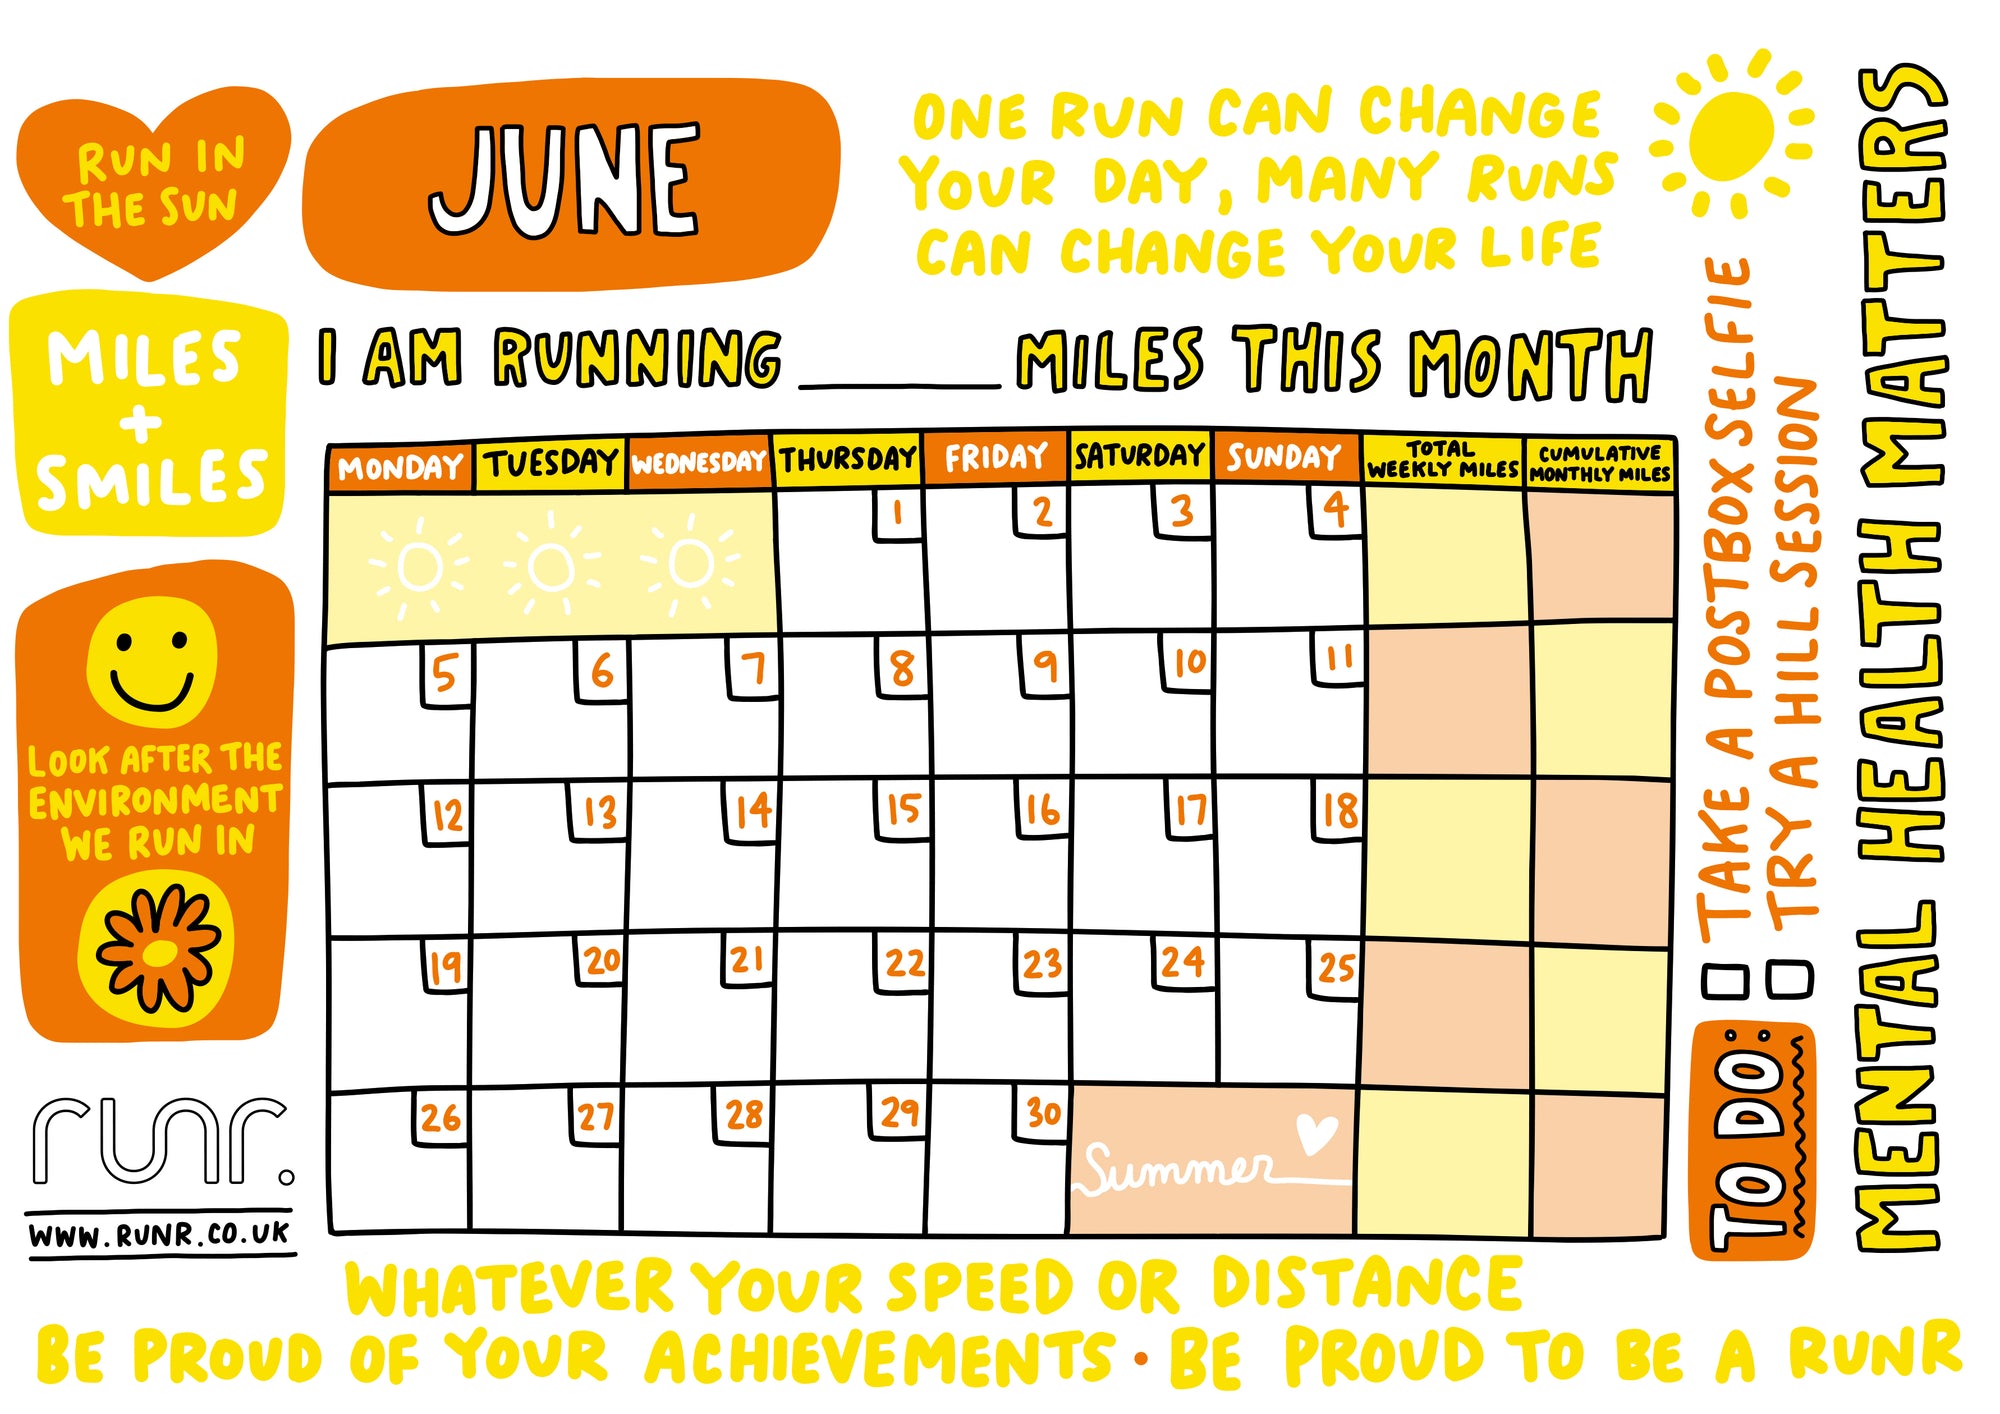 June 2023 Mileage Tracker - Free to Download!